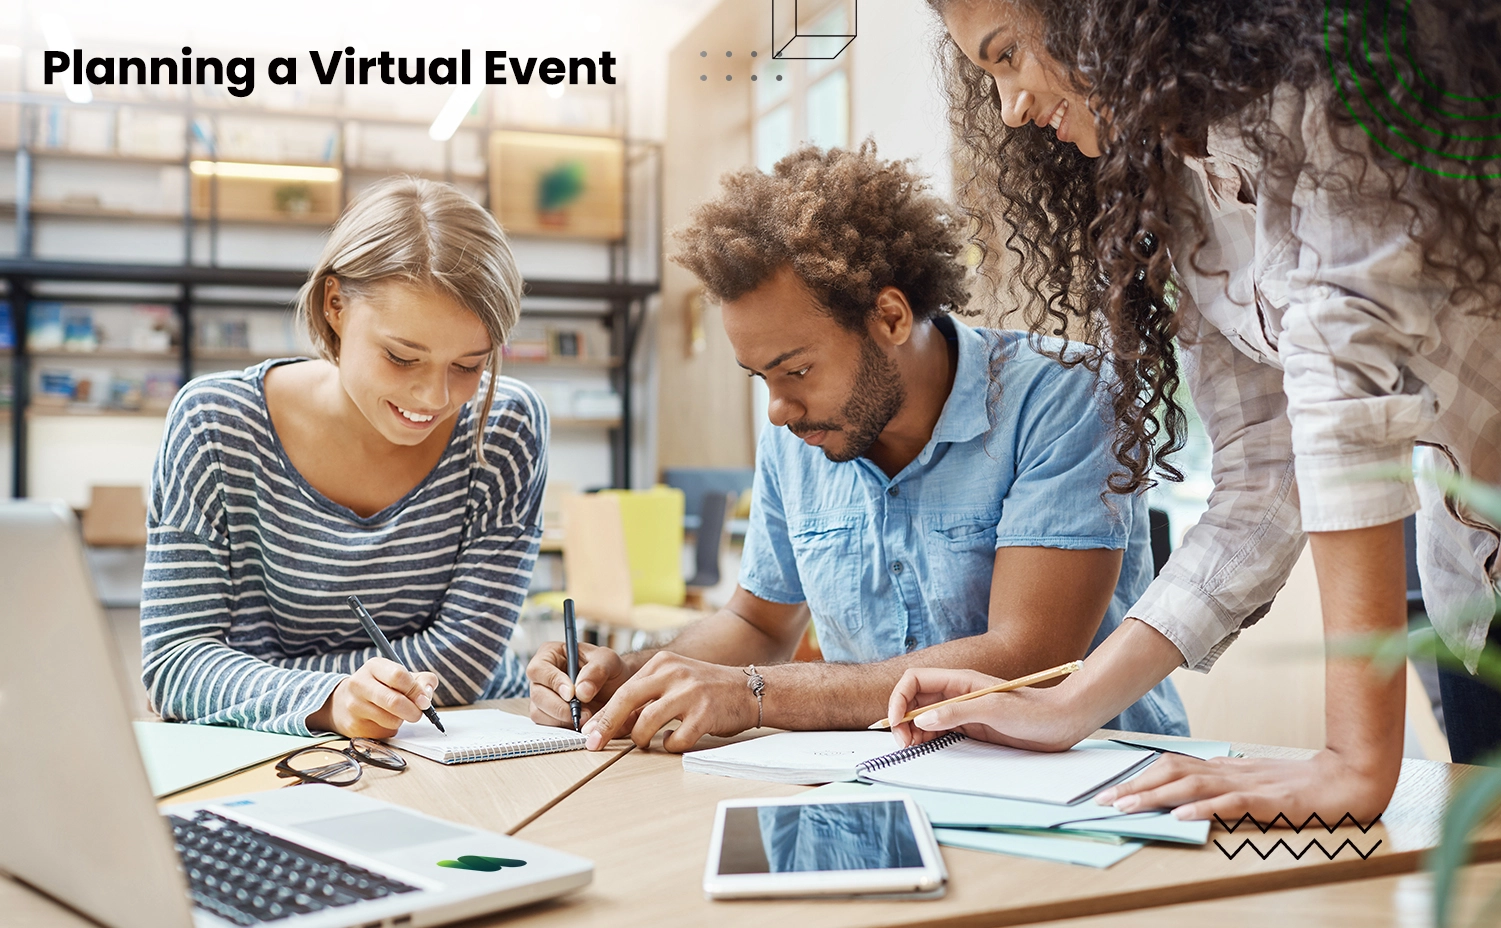 The Positives of Planning a Virtual Event